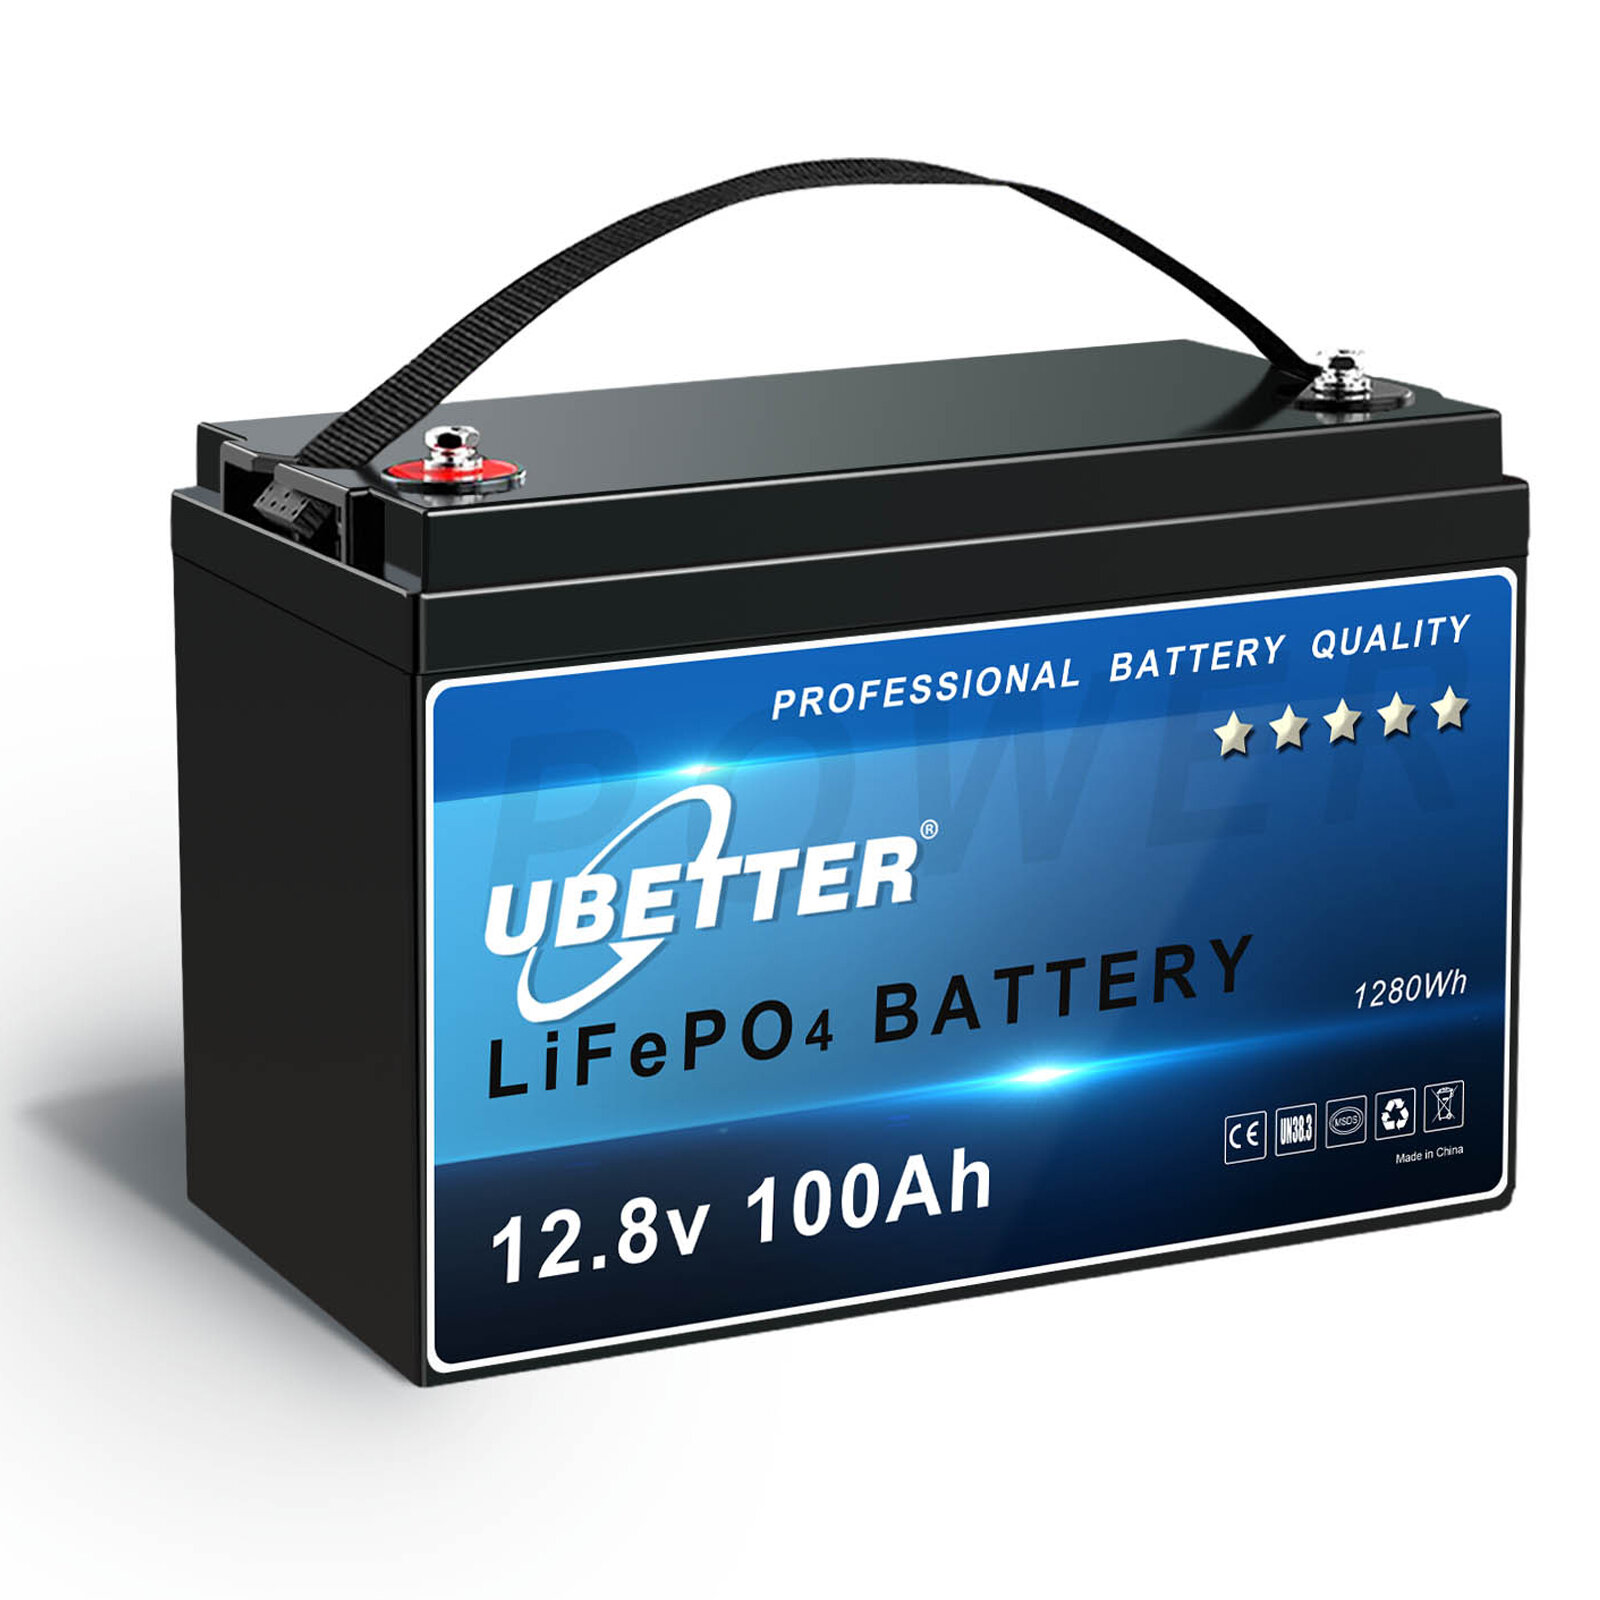 best price,ubetter,12v,100ah,lifepo4,battery,pack,1280wh,with,bms,eu,discount